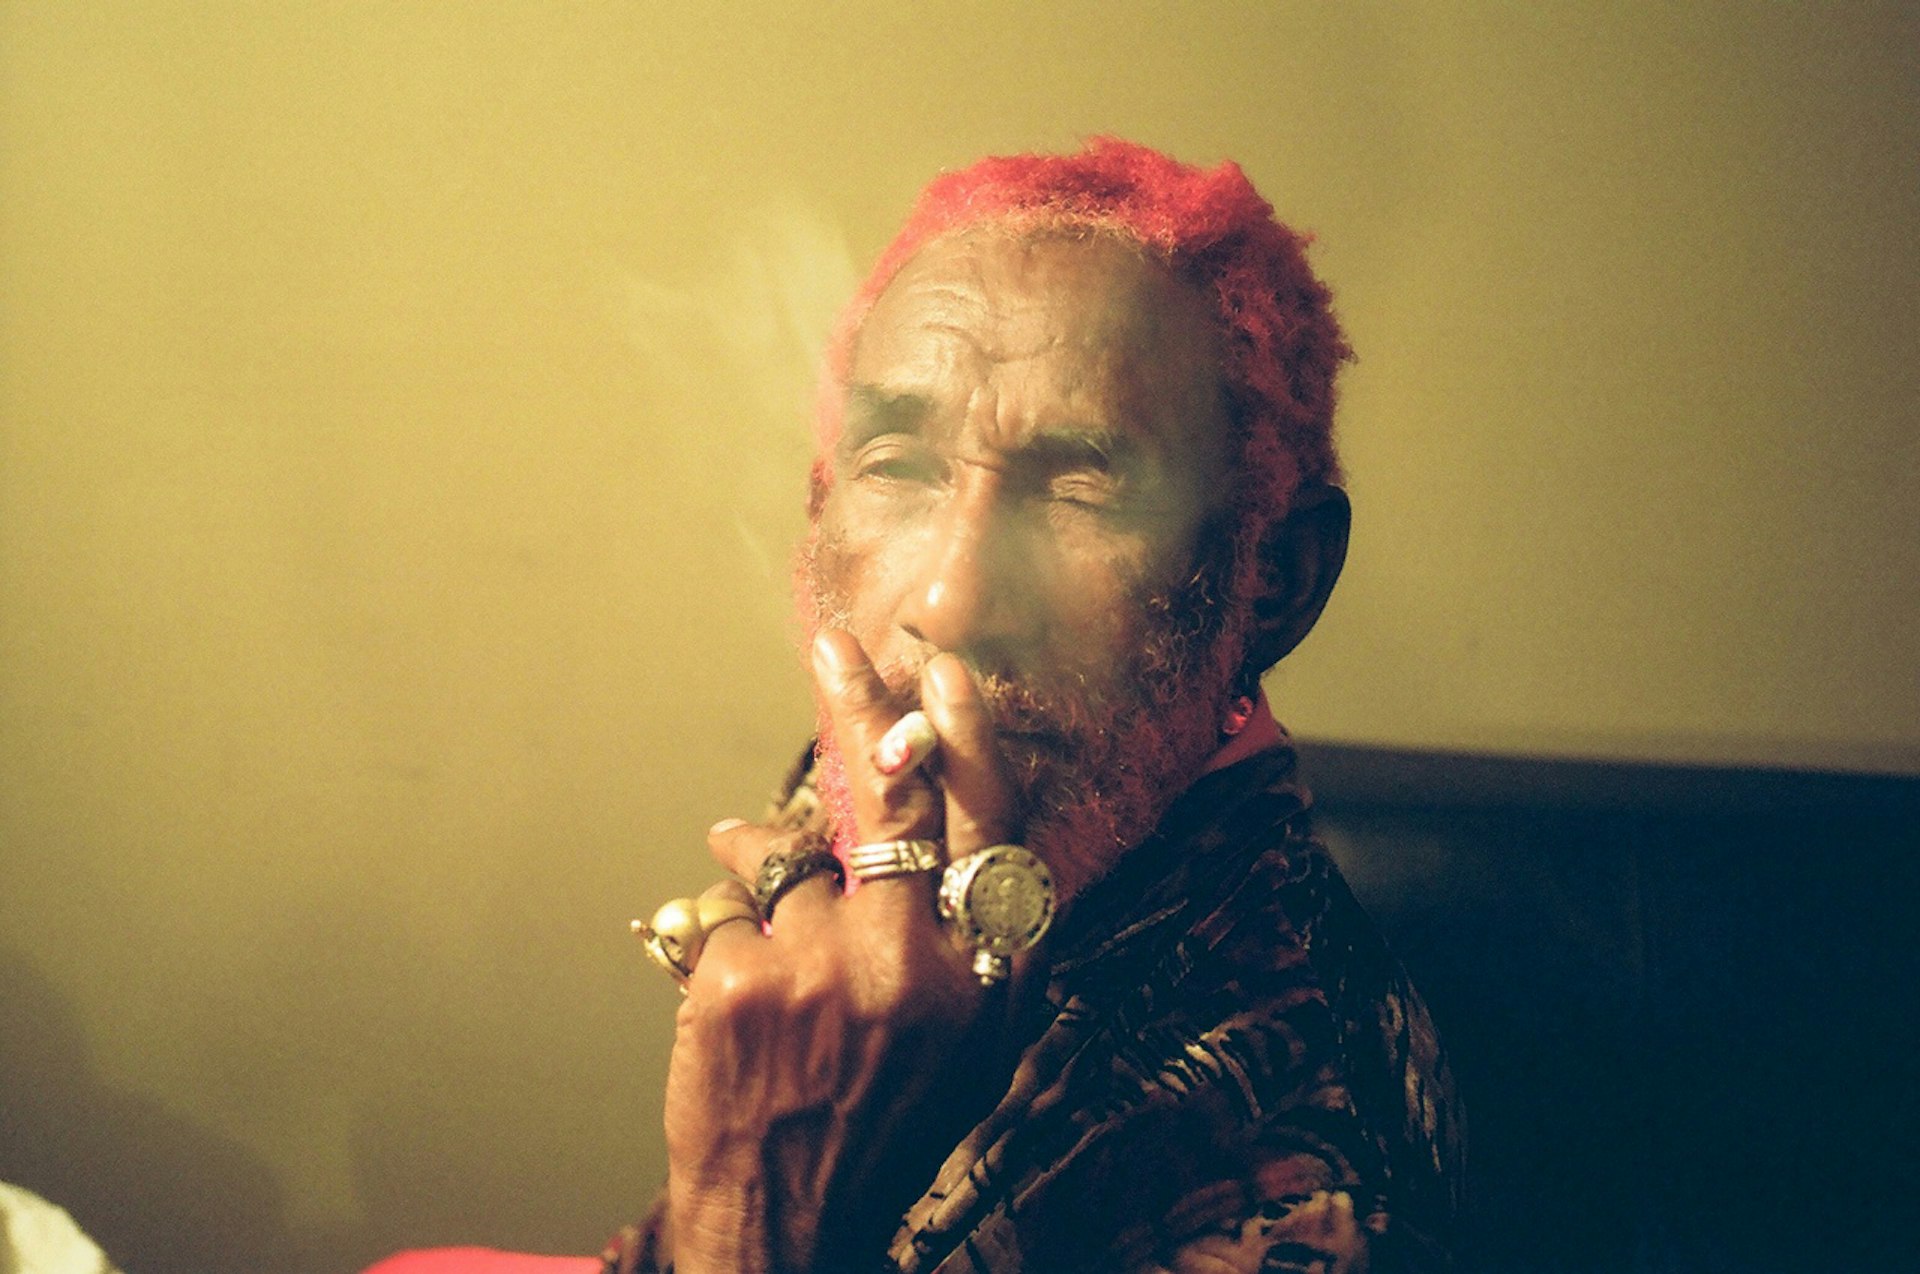 Words of indecipherable wisdom from the original Rastaman, Lee ‘Scratch’ Perry